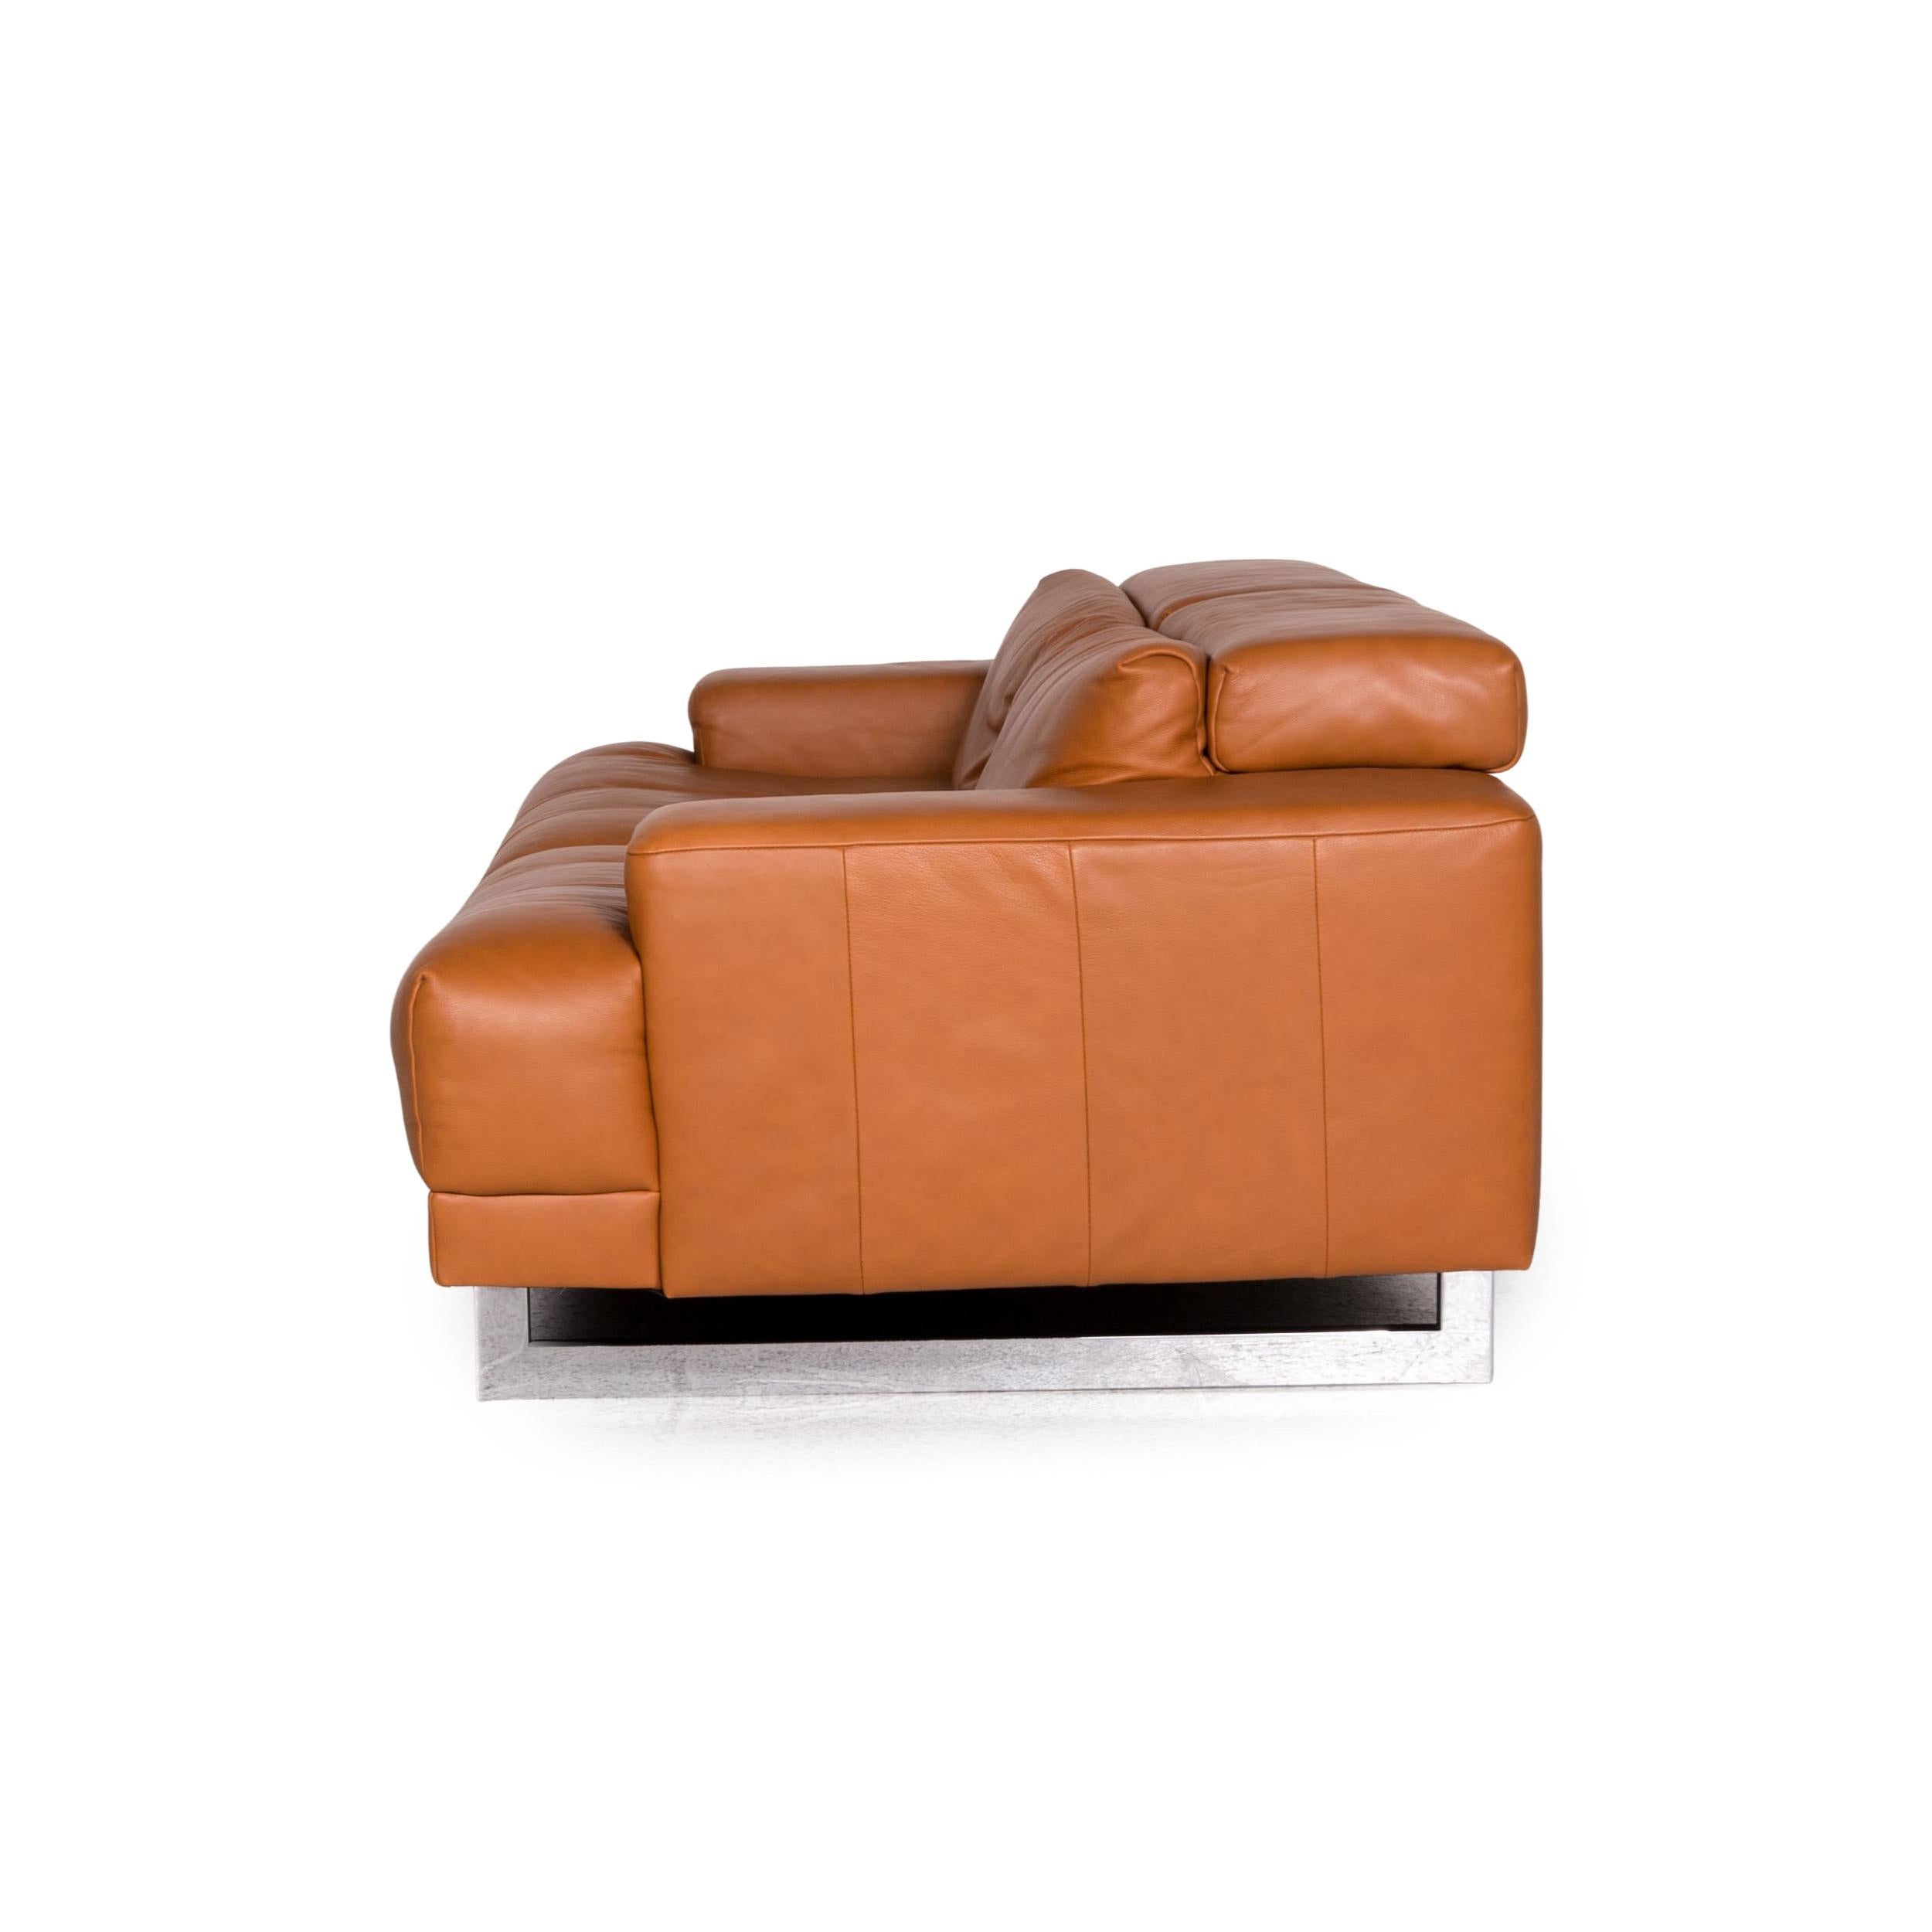 Ewald Schillig Leather Sofa Brown Cognac Three-Seater Couch For Sale 3